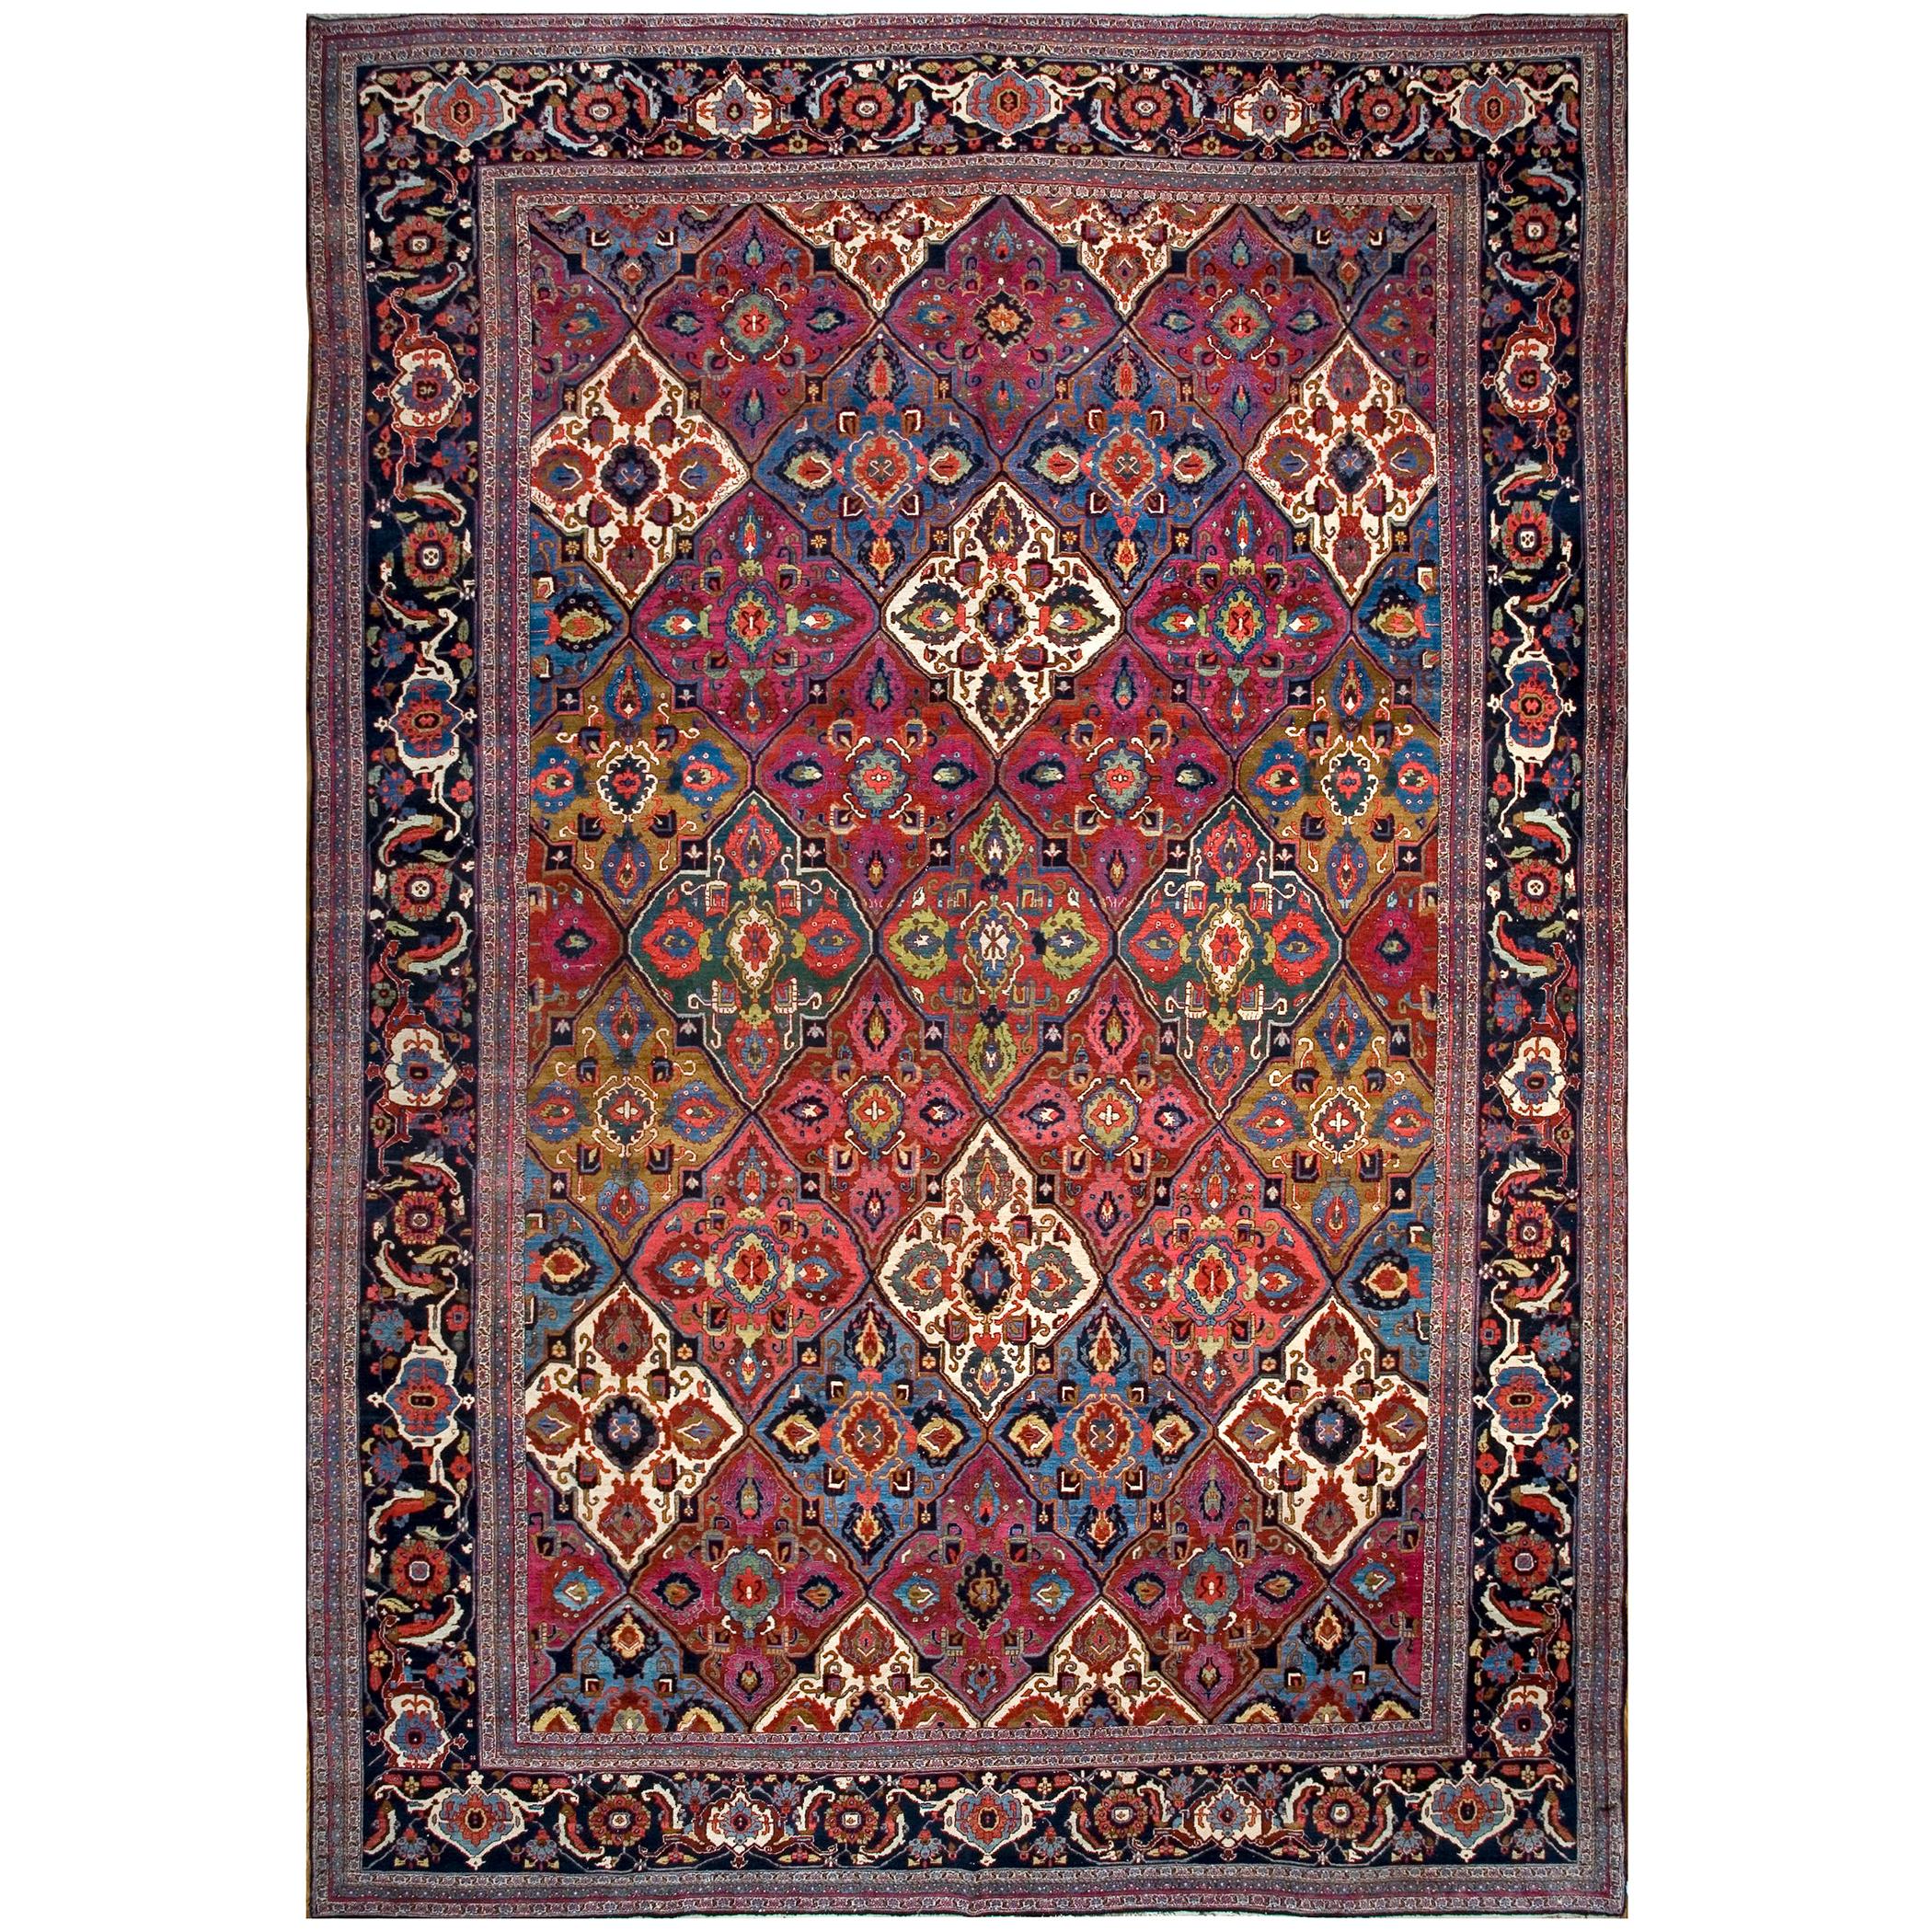 Early 20th Century E. Persian Khorassan Moud Carpet with Garden Design For Sale